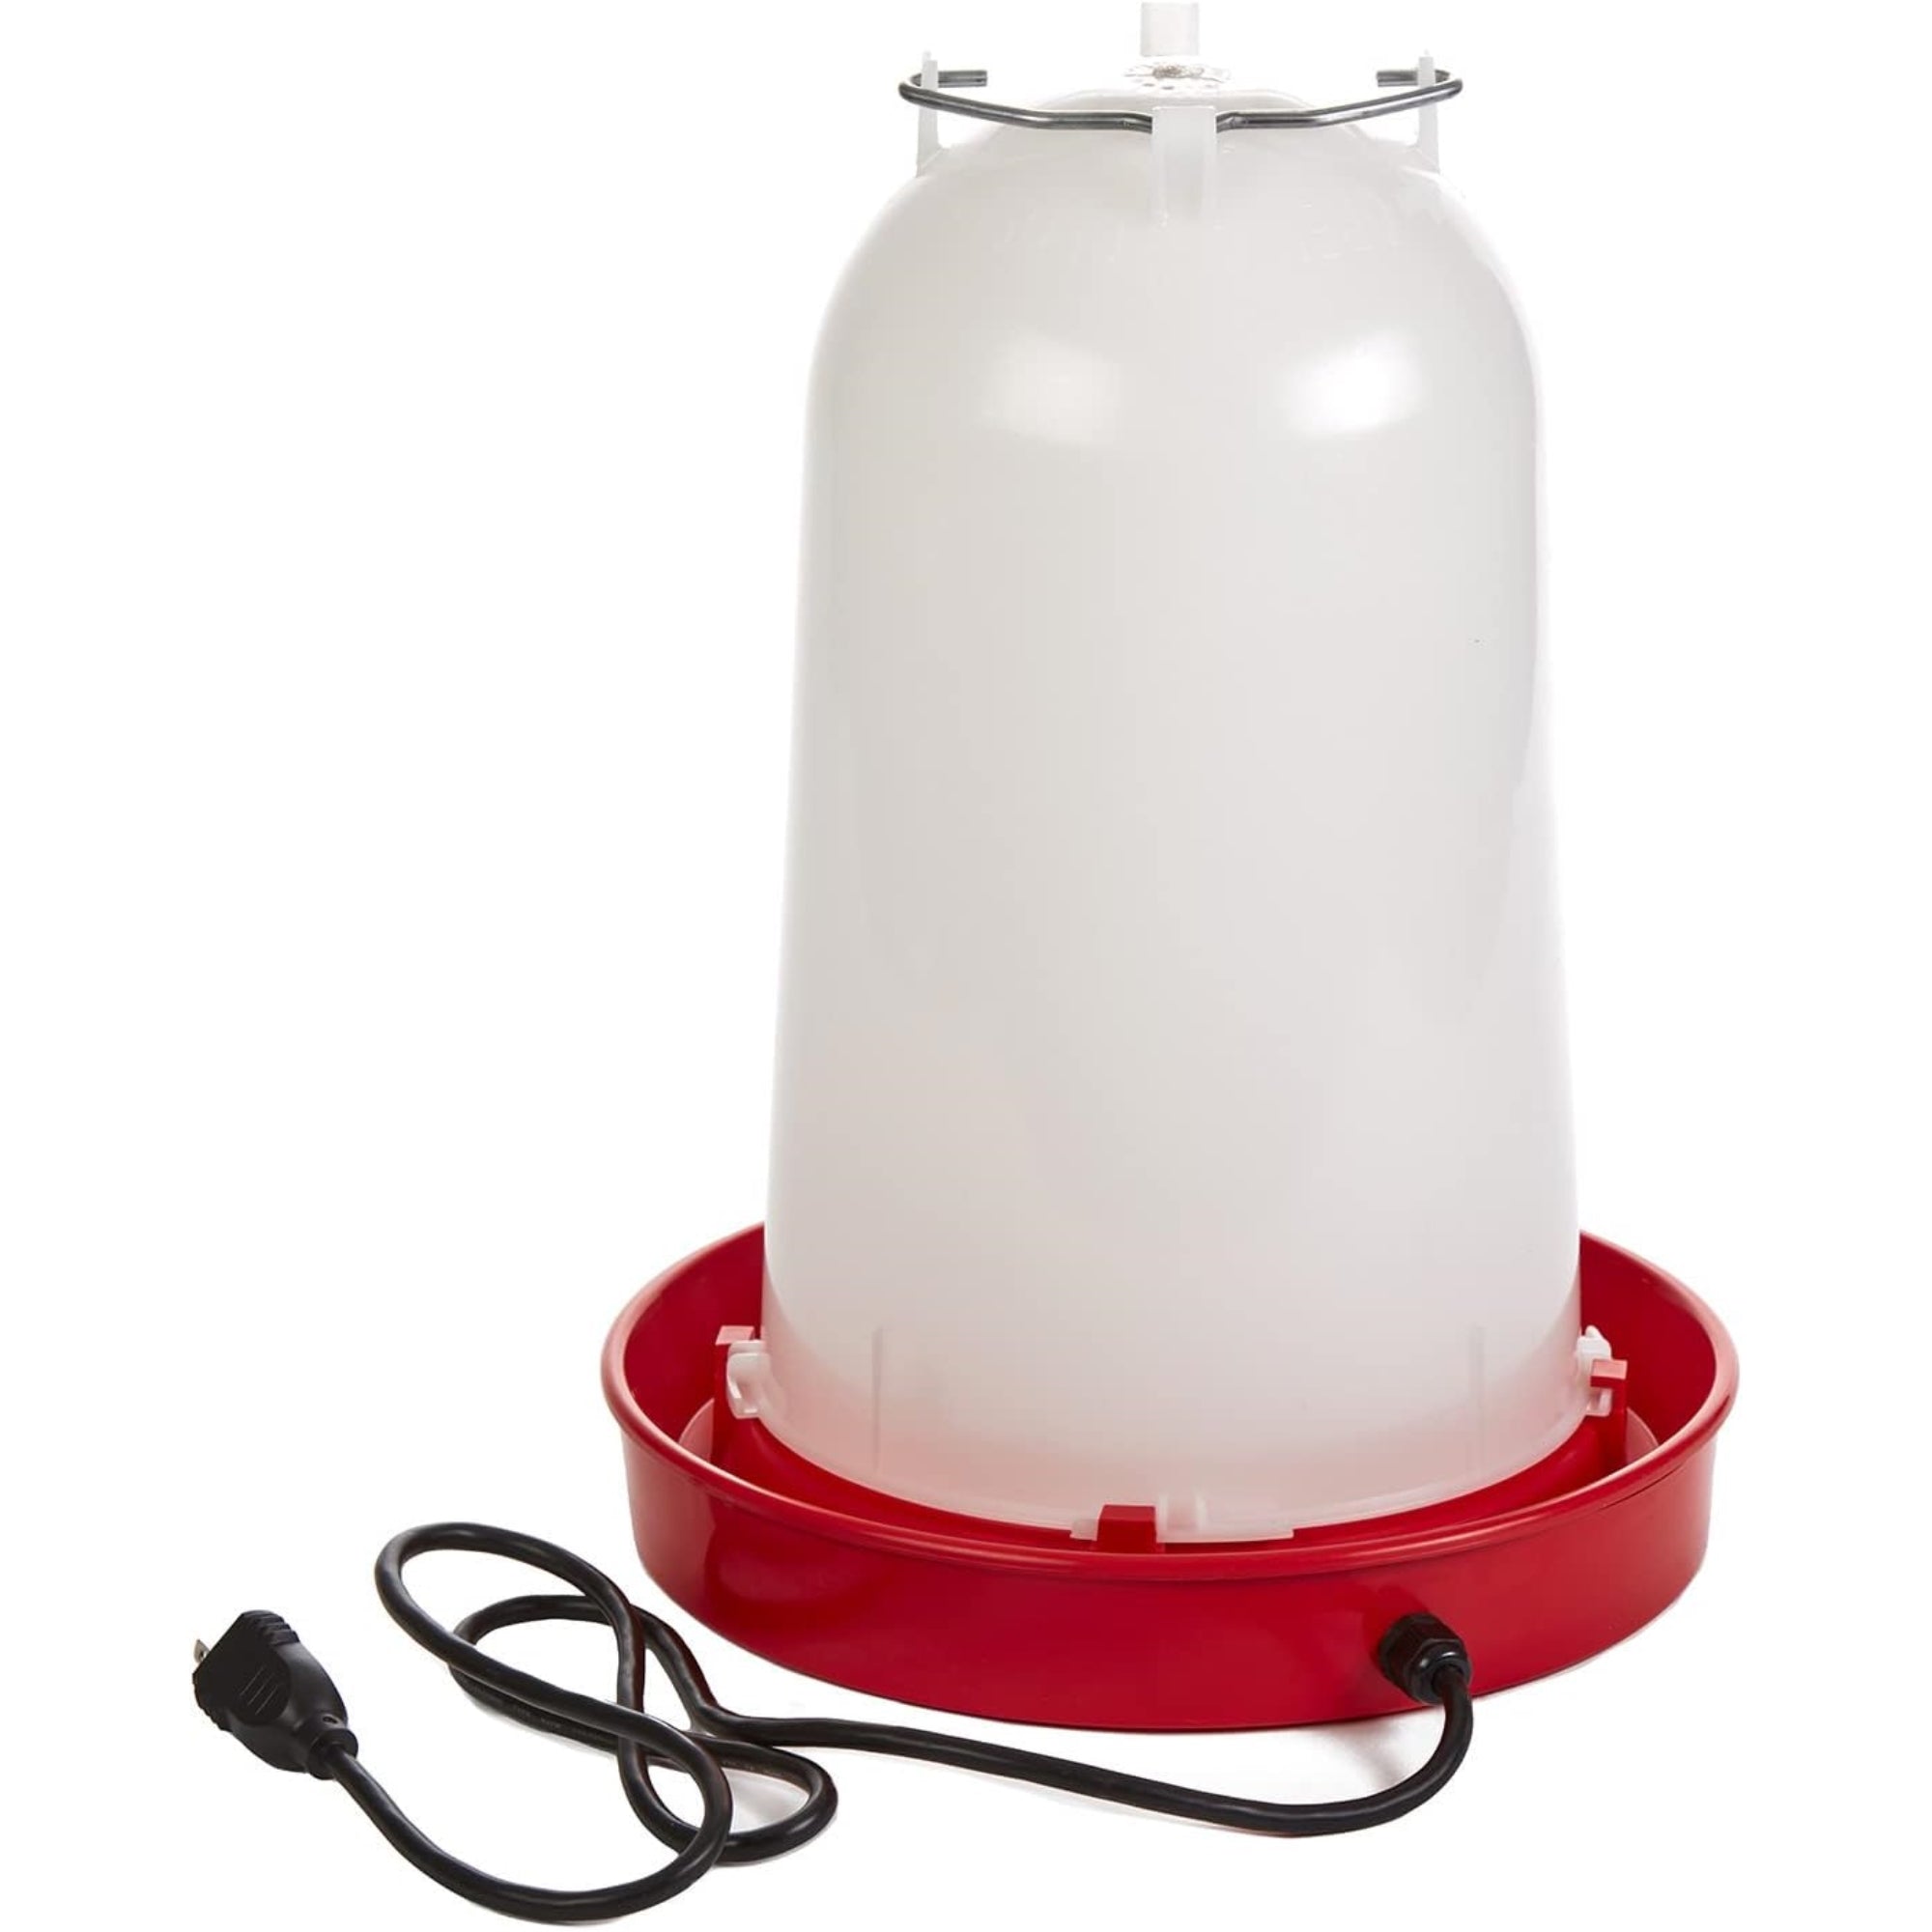 Miller Manufacturing Heated Poultry Waterer with Metal Handle, 3 Gallon